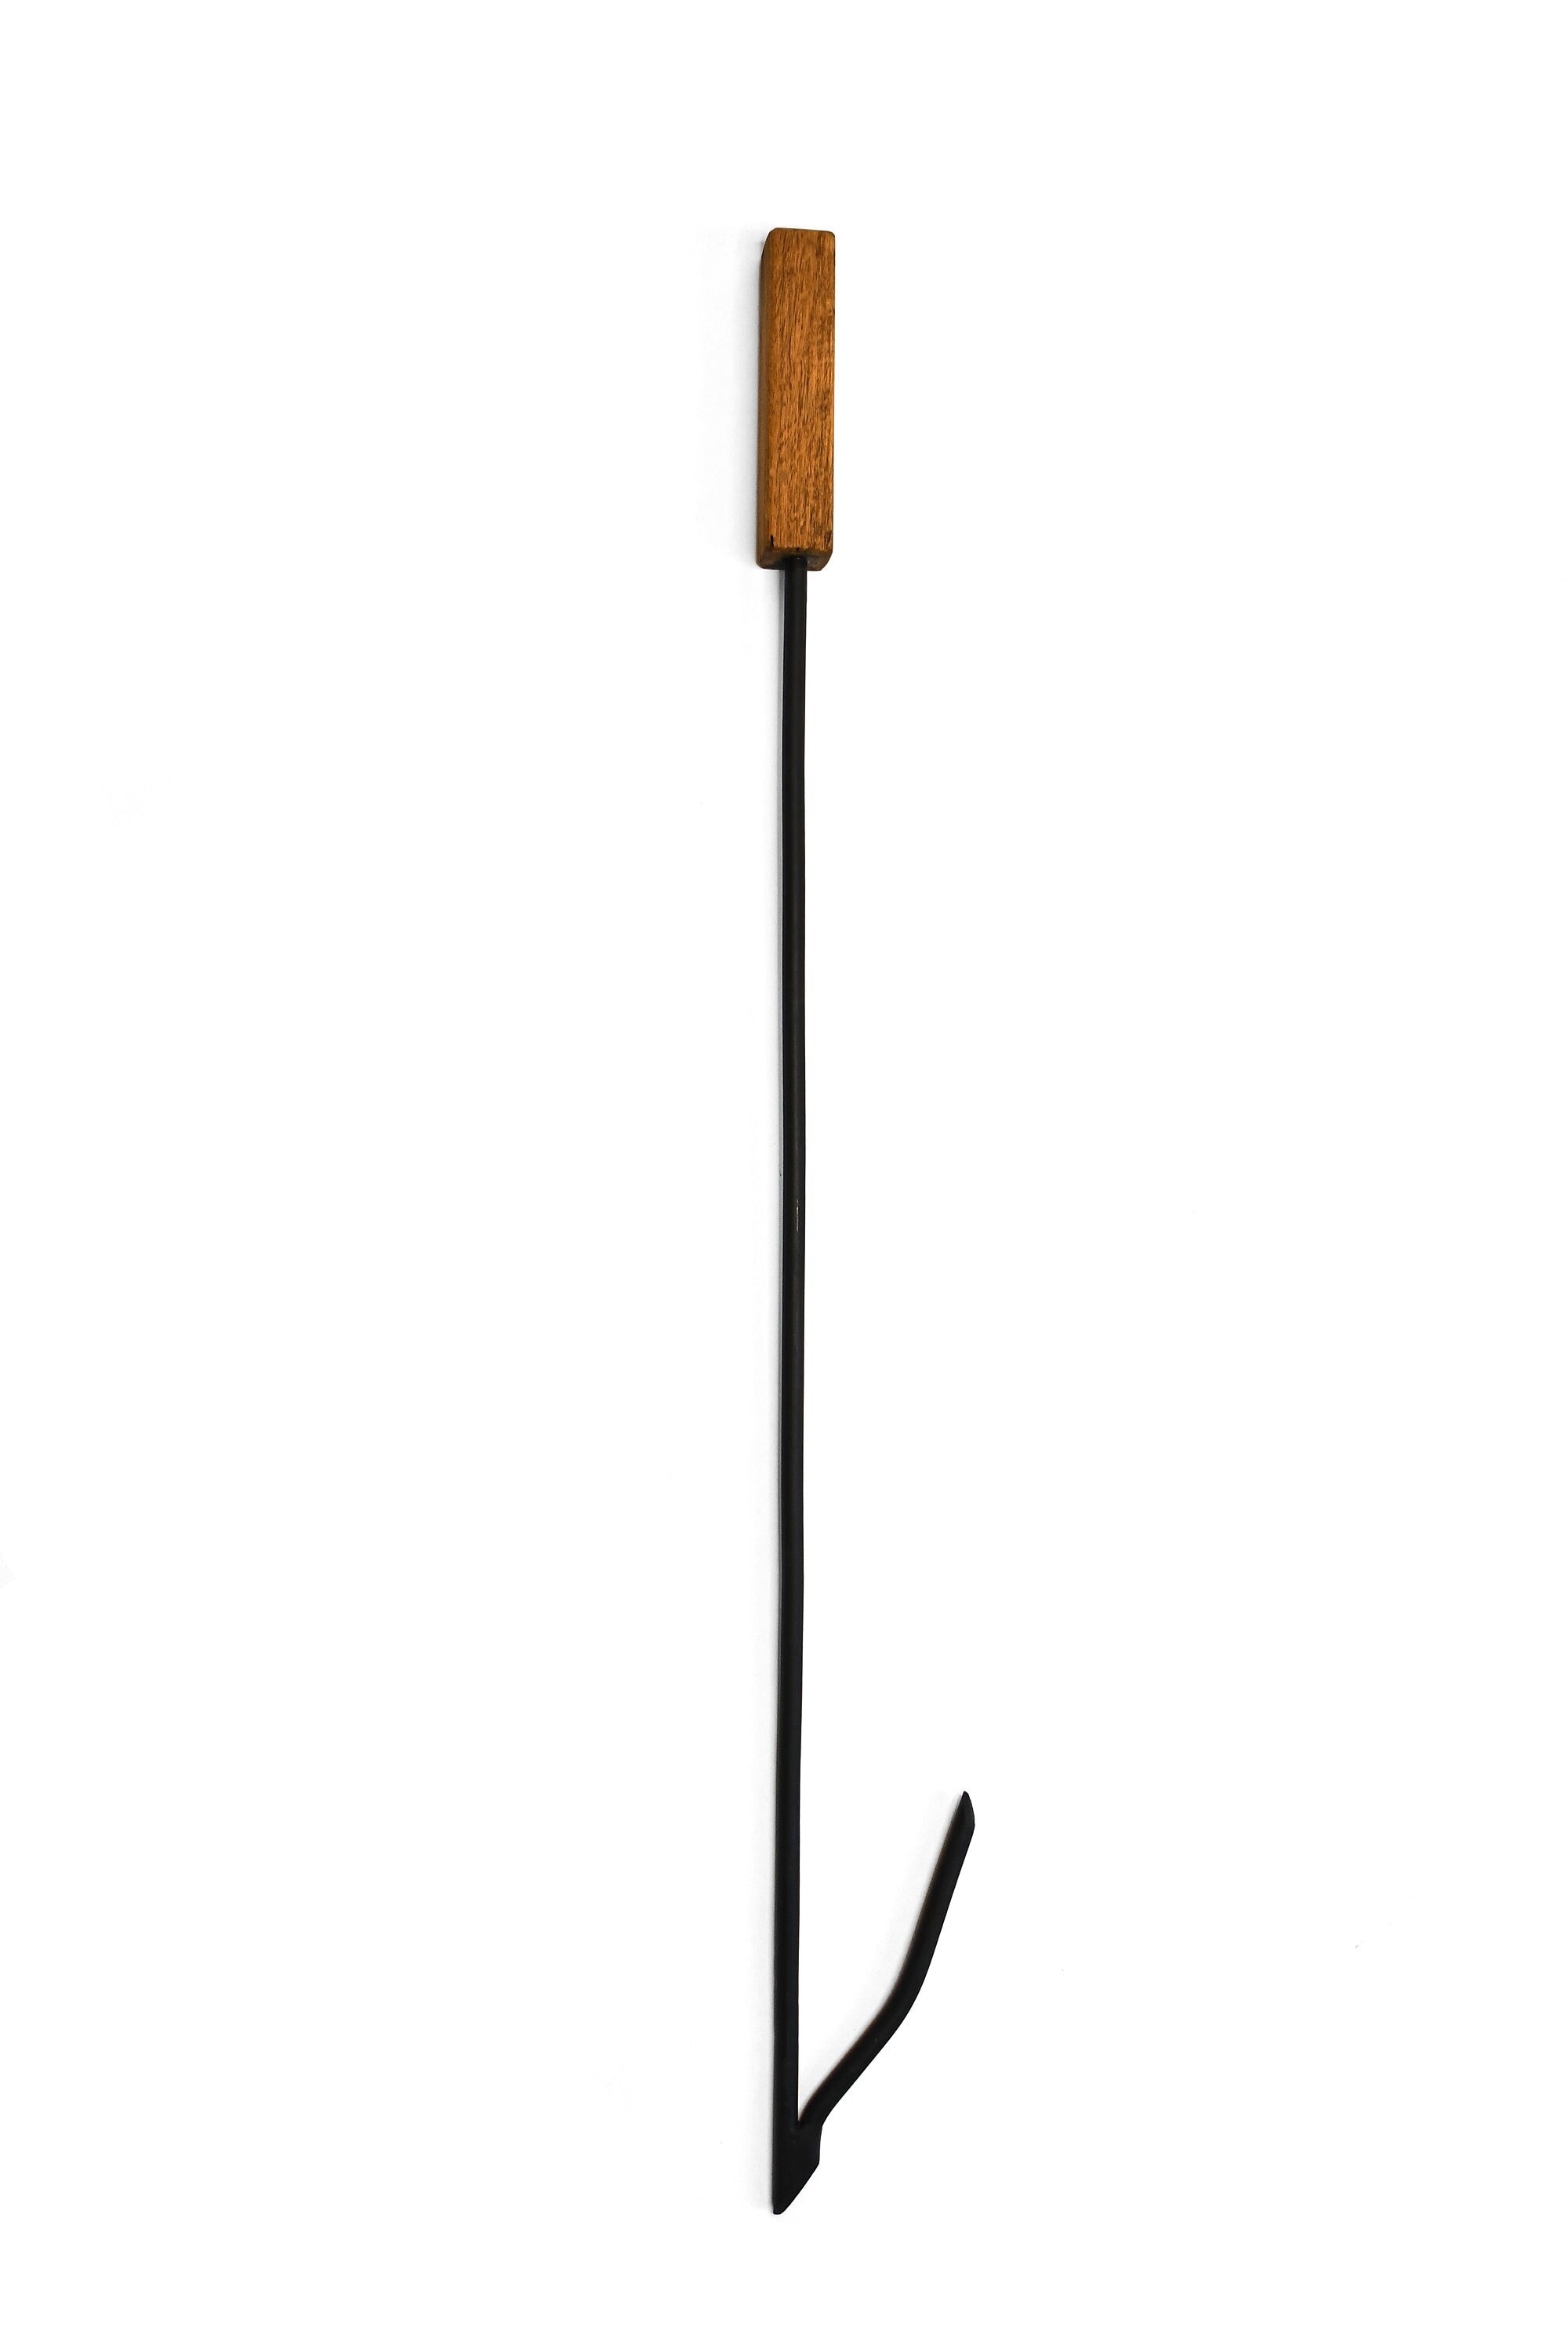 Gaucholife Fireplace BBQ Tools Set Fire Poker Tongs Brush Shovel And Stand | Blacksmith Made